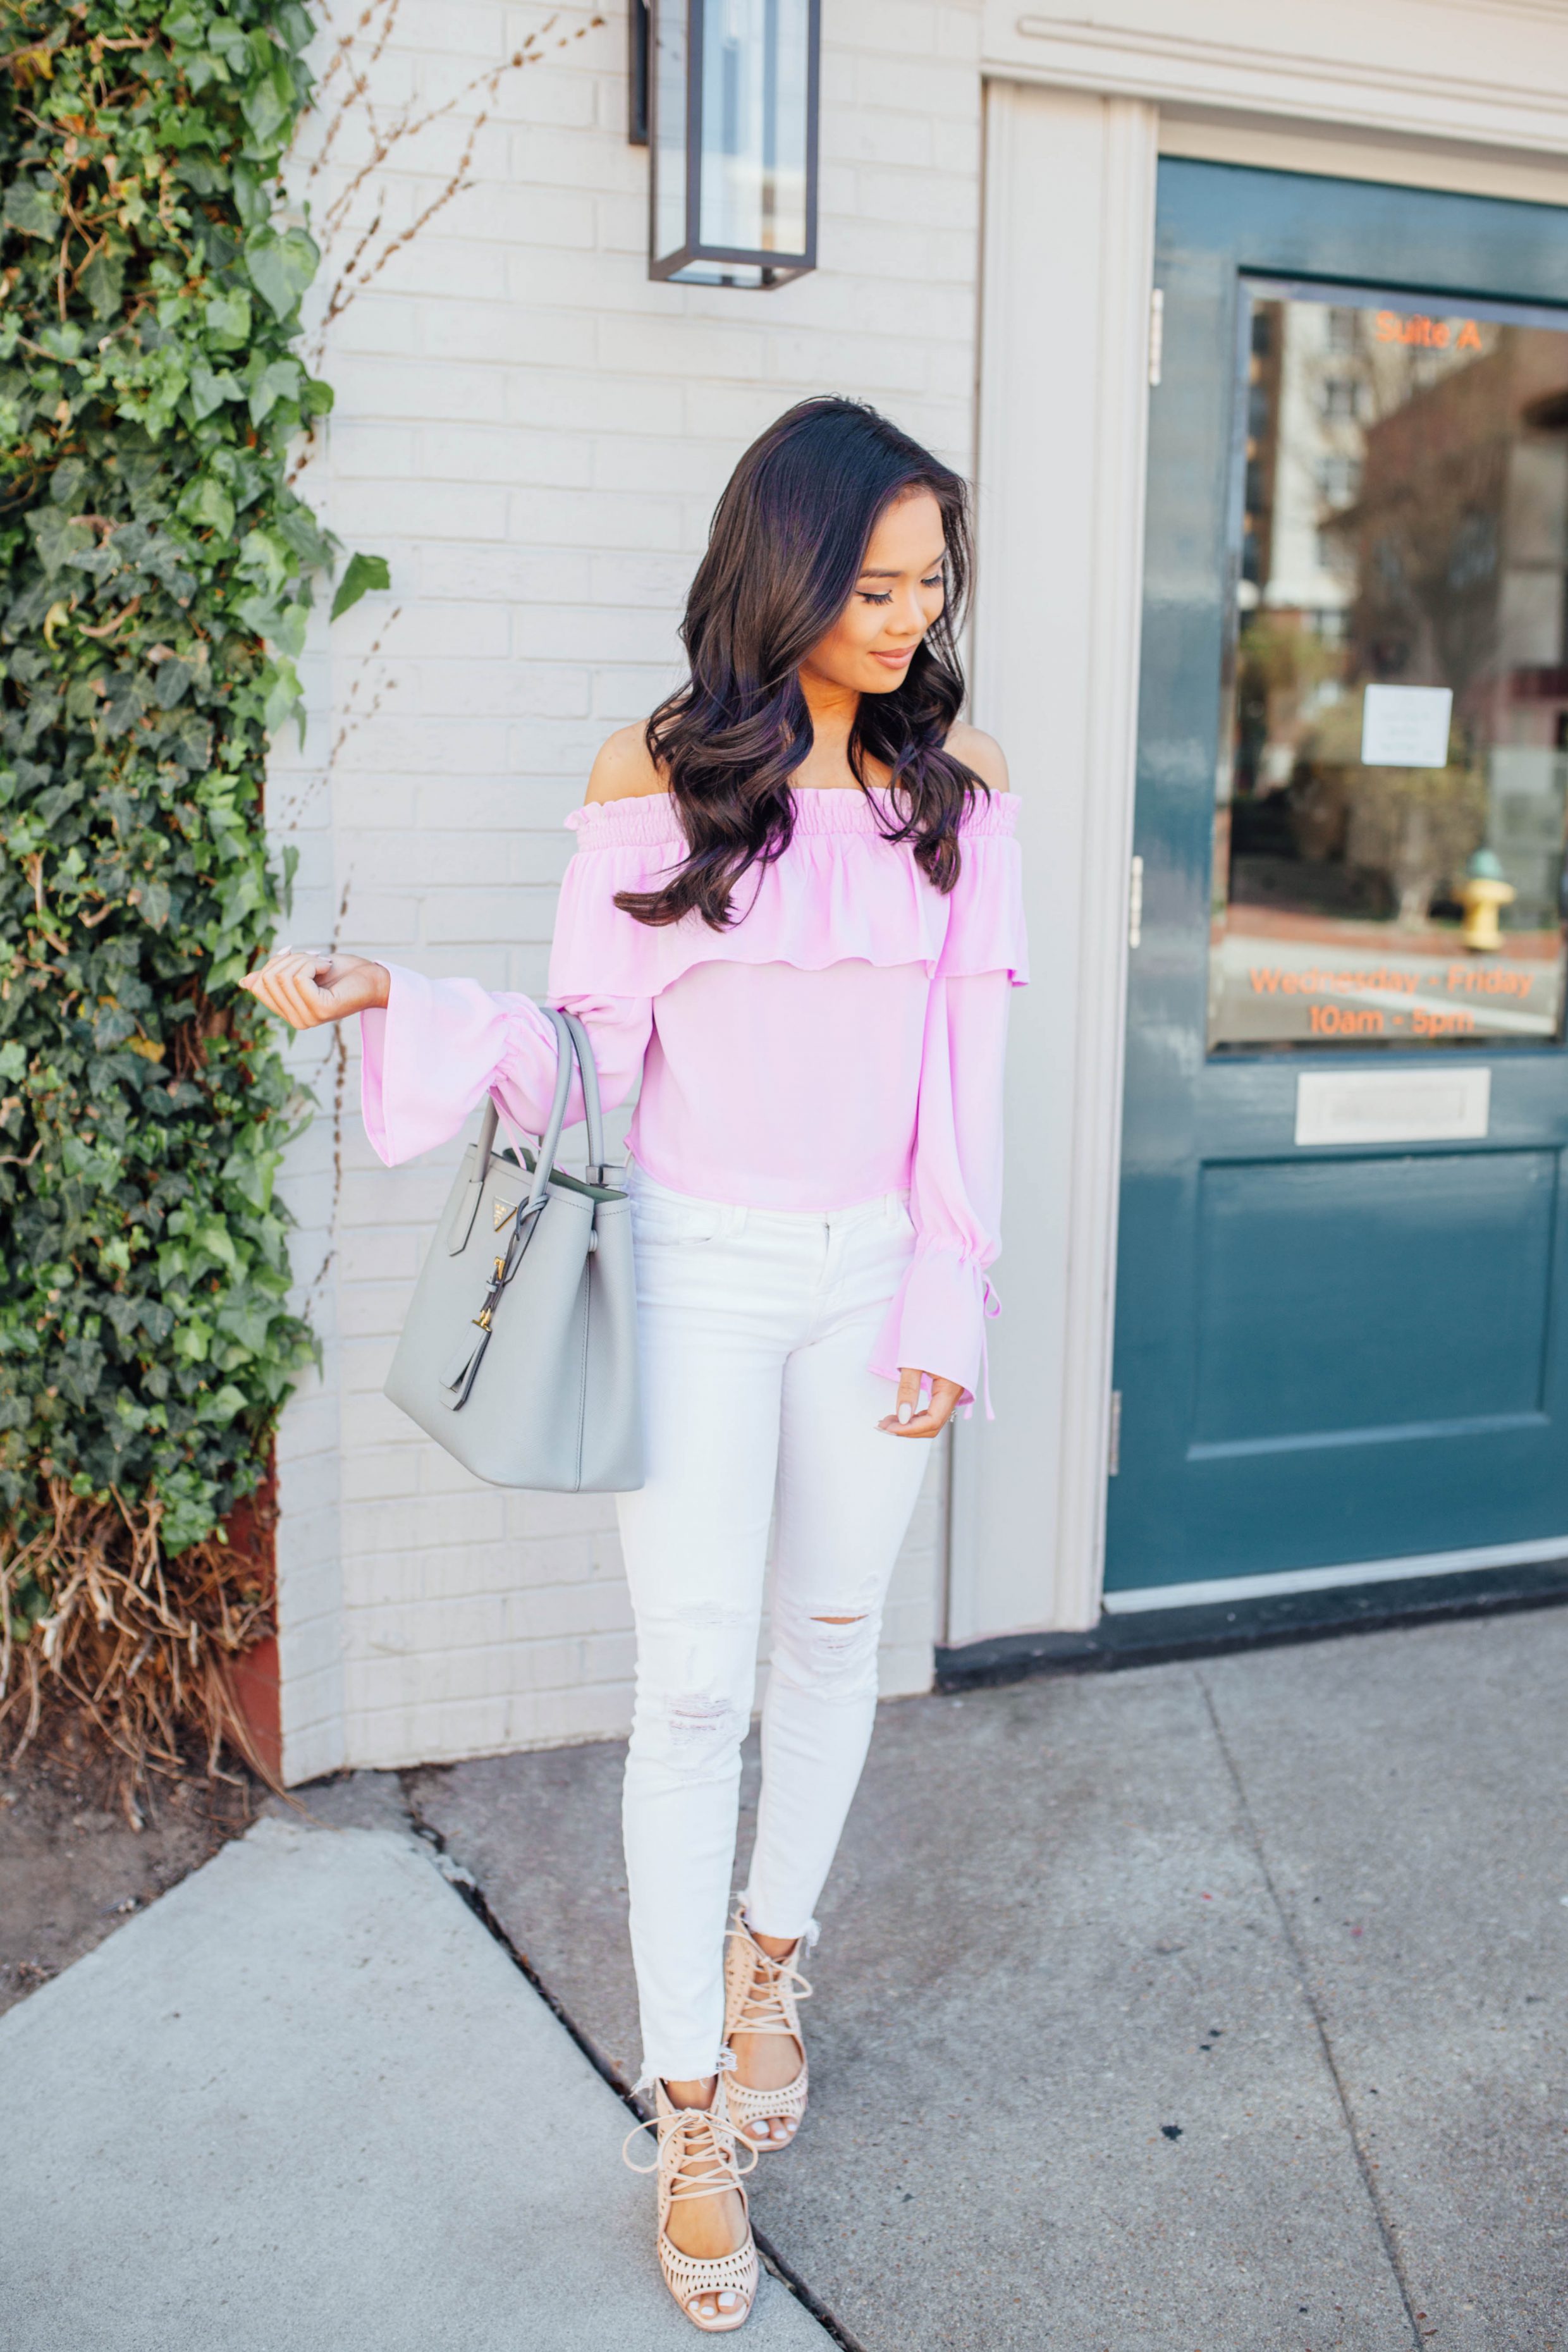 Hoang-Kim wears a lavender off-the-shoulder top with white jeans and wedges for spring